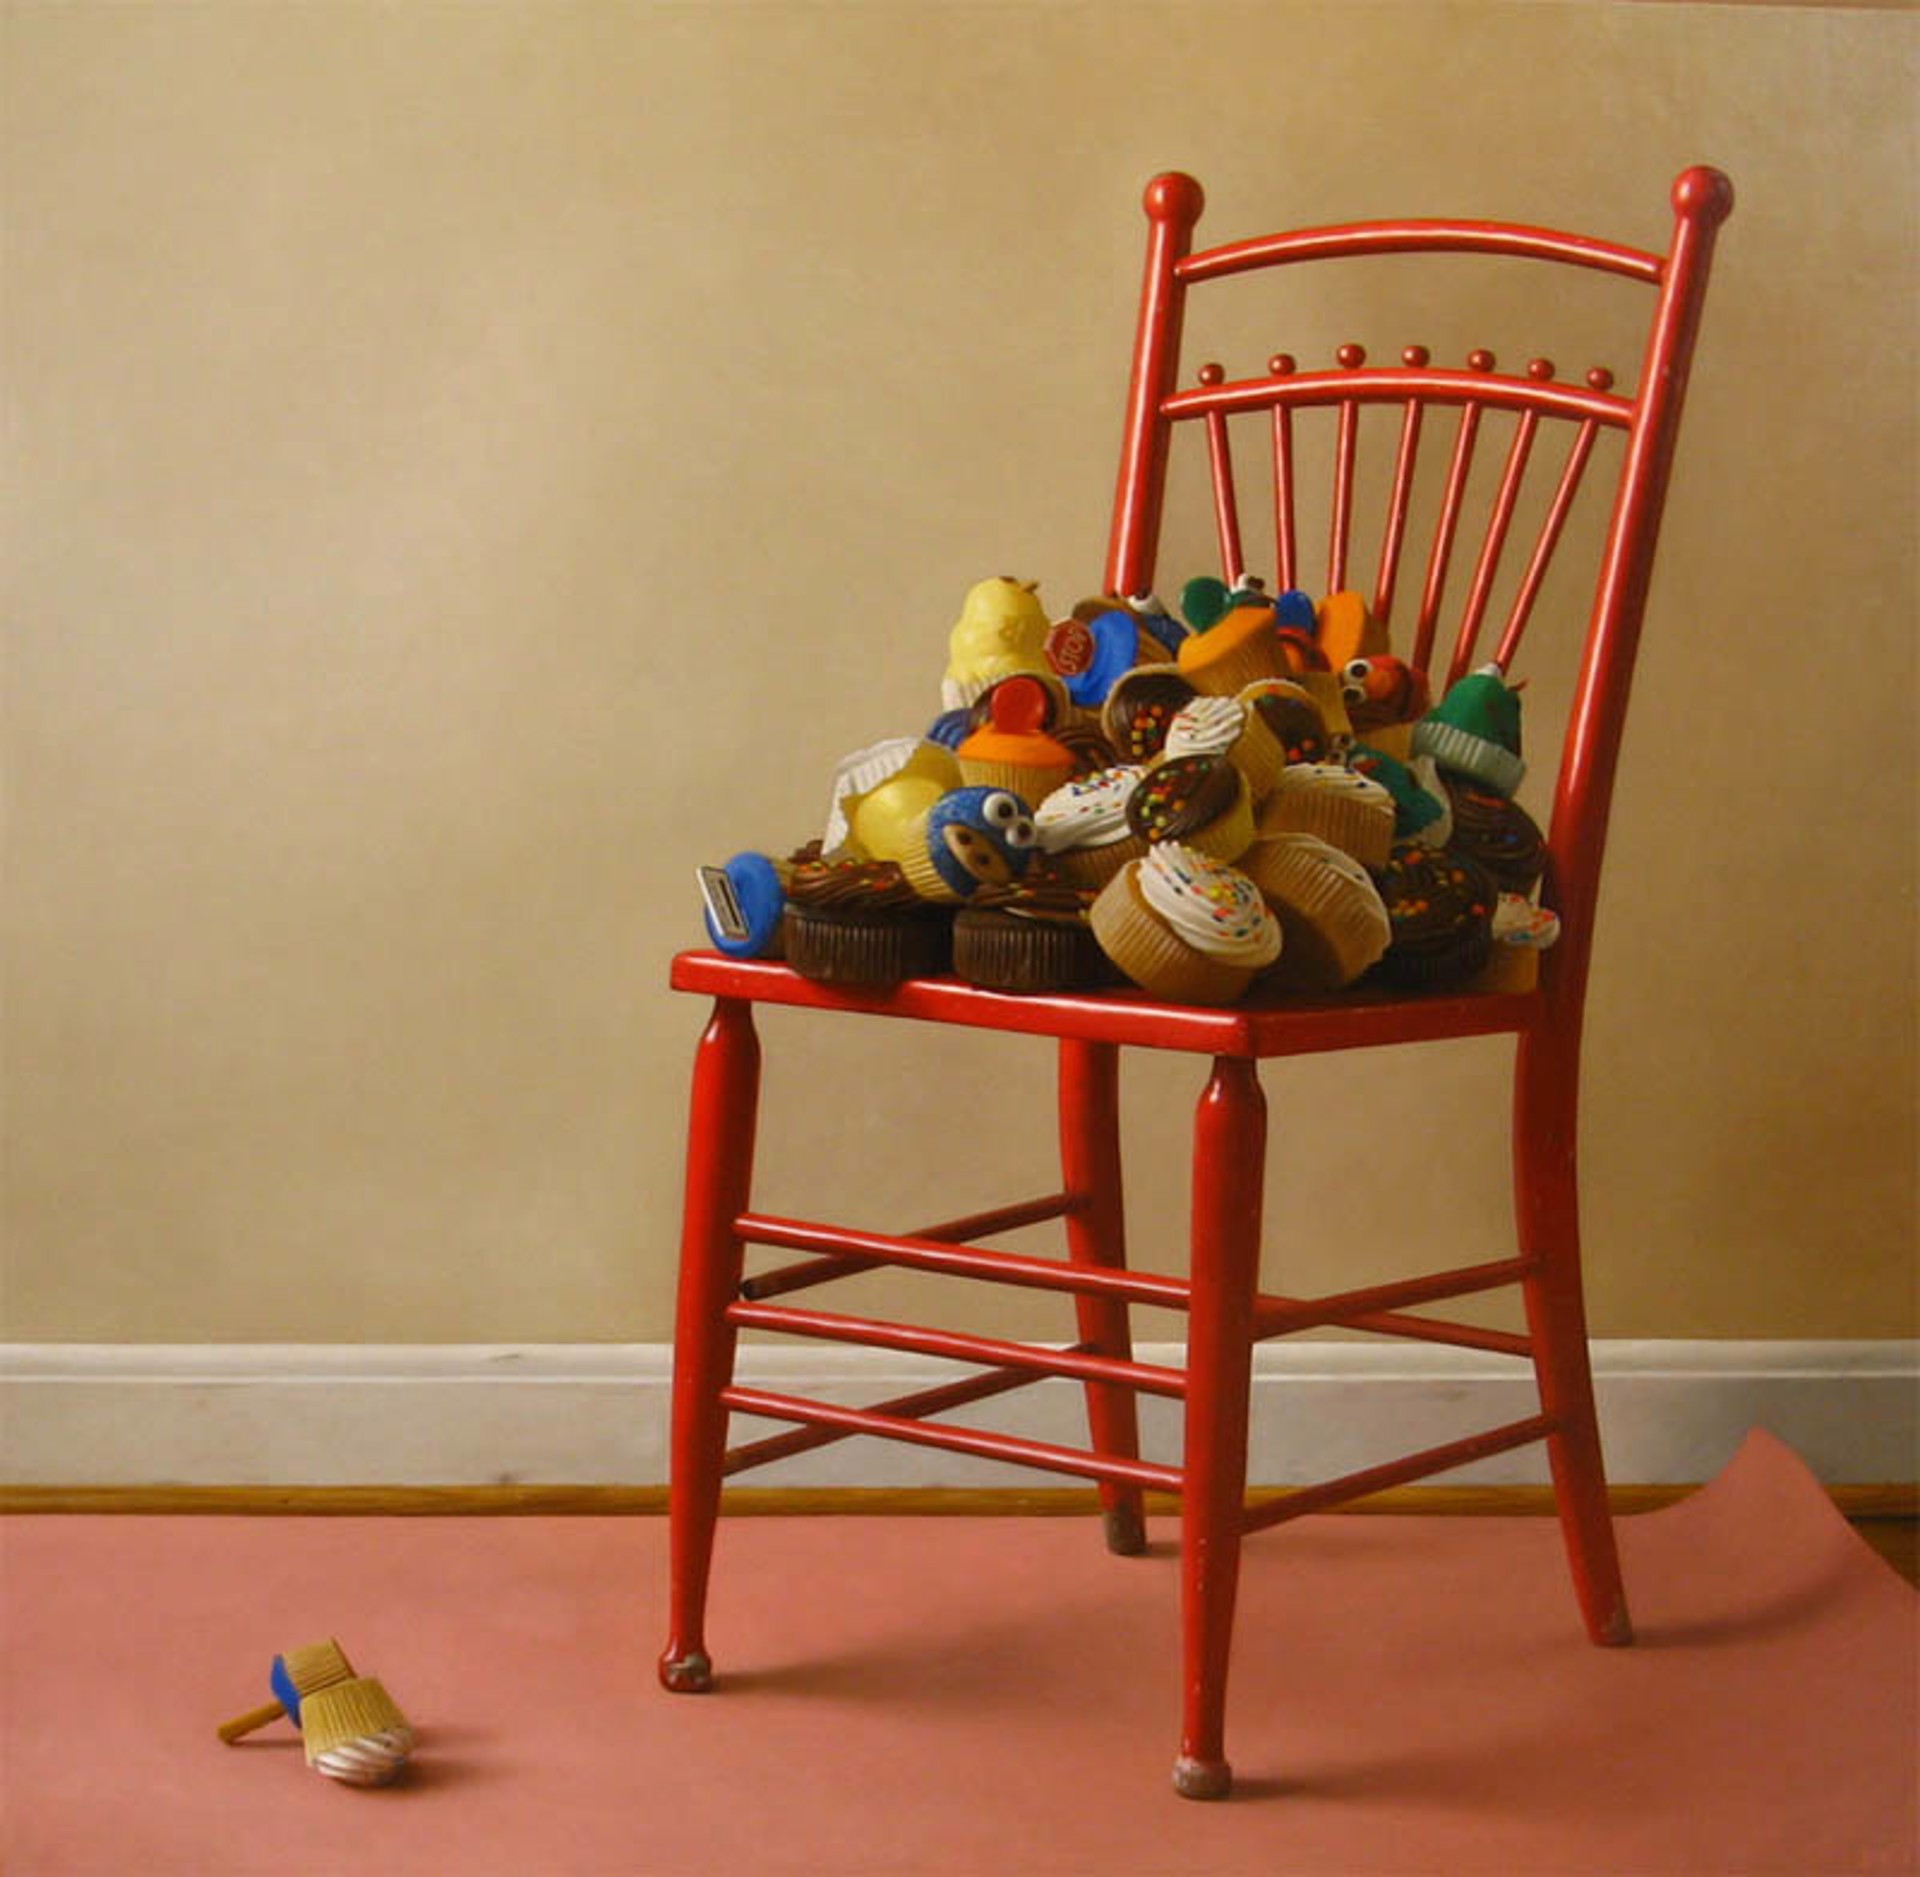 Ode to Fat Chair by Dan Jackson